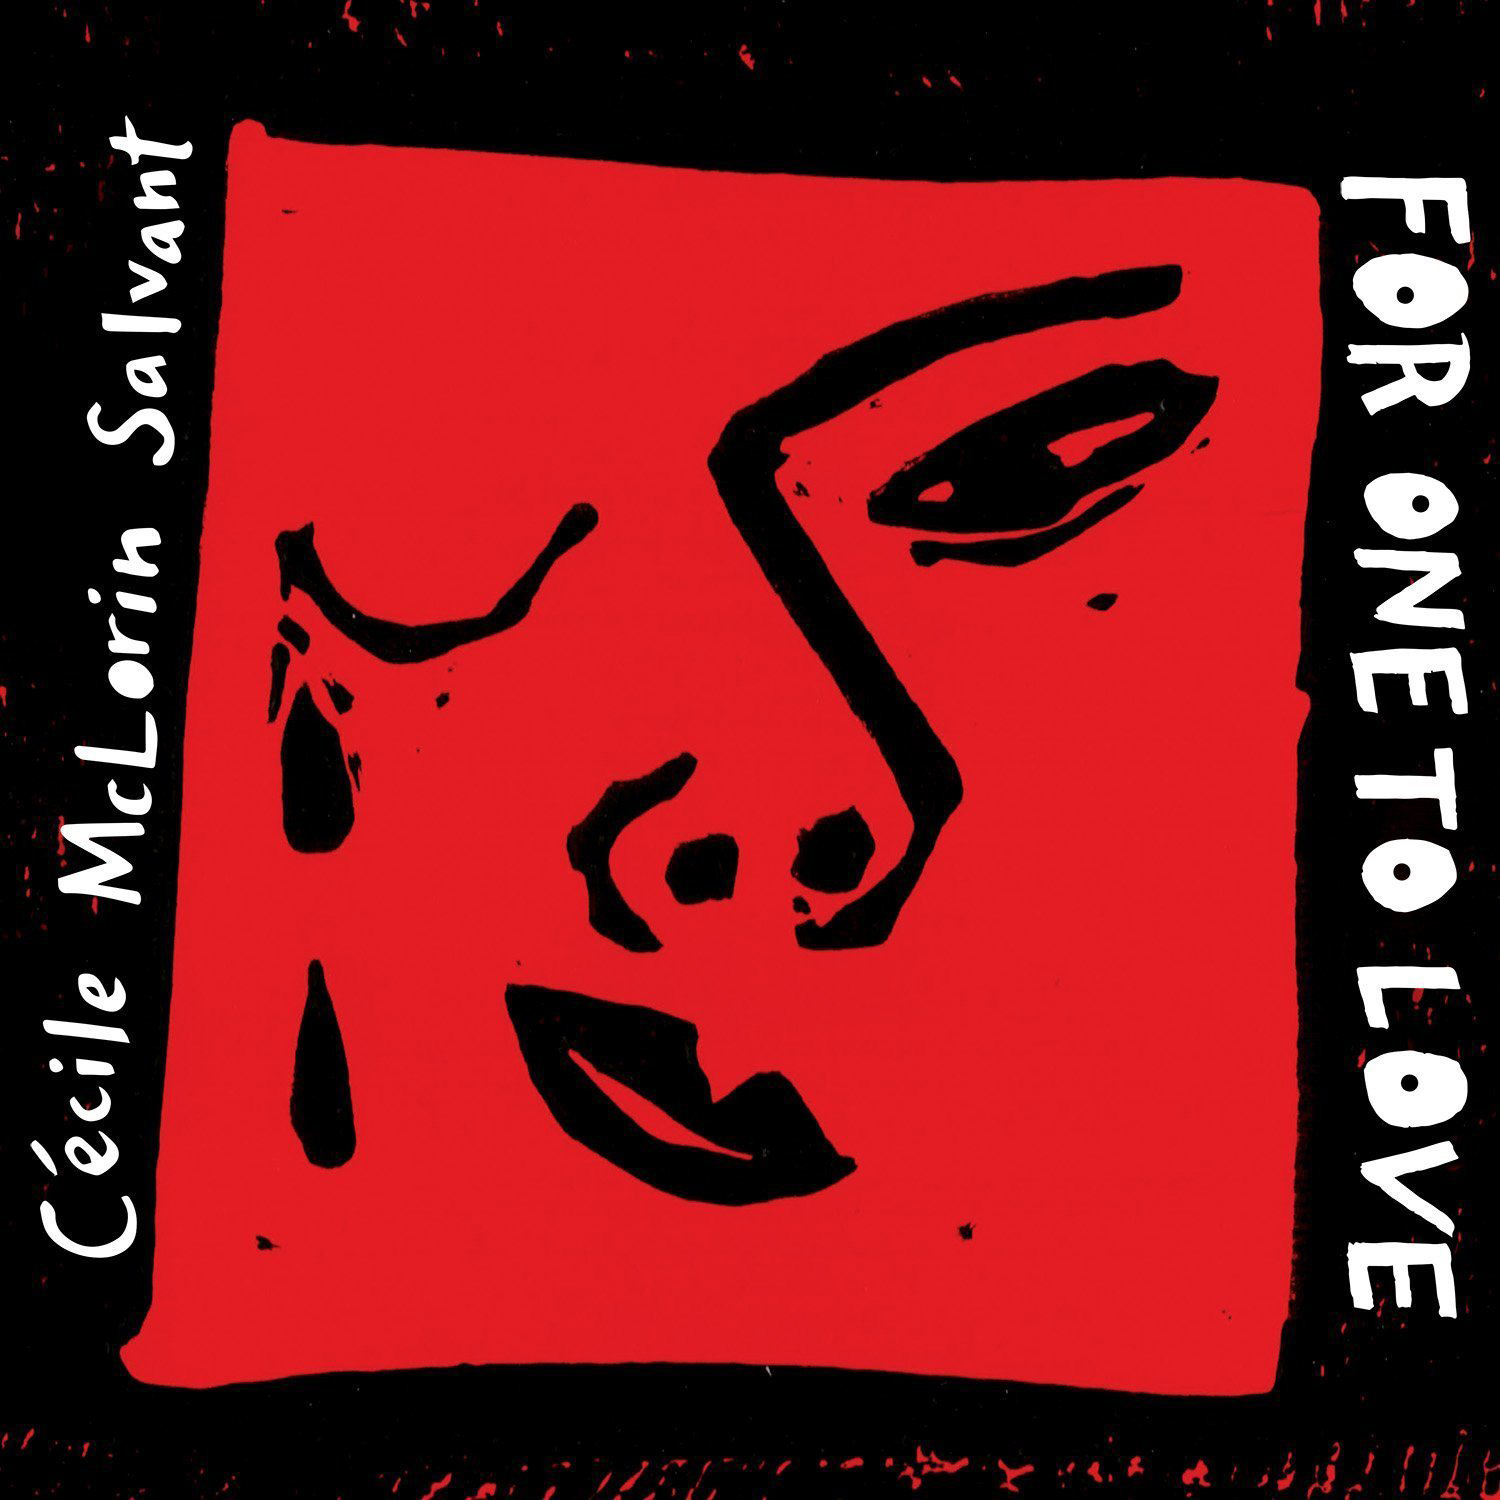 Cecile McLorin Salvant - For One To Love (2015) [Qobuz FLAC 24bit/96kHz]